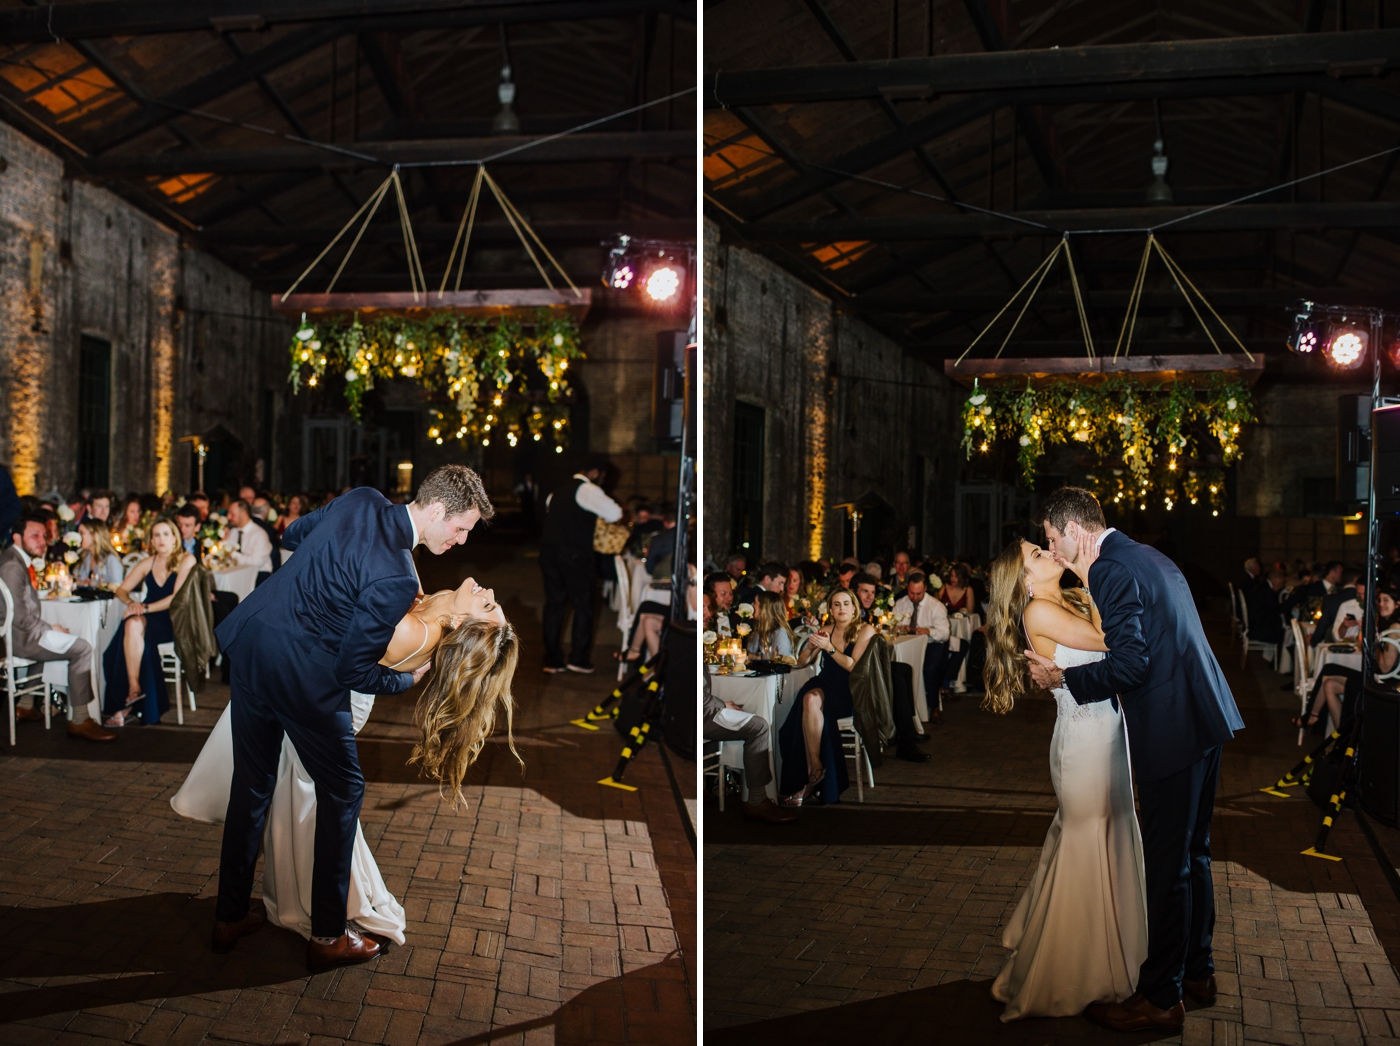 Taylor and Brett’s Spring Destination Wedding at Georgia State Railroad Museum by Izzy Hudgins Photography